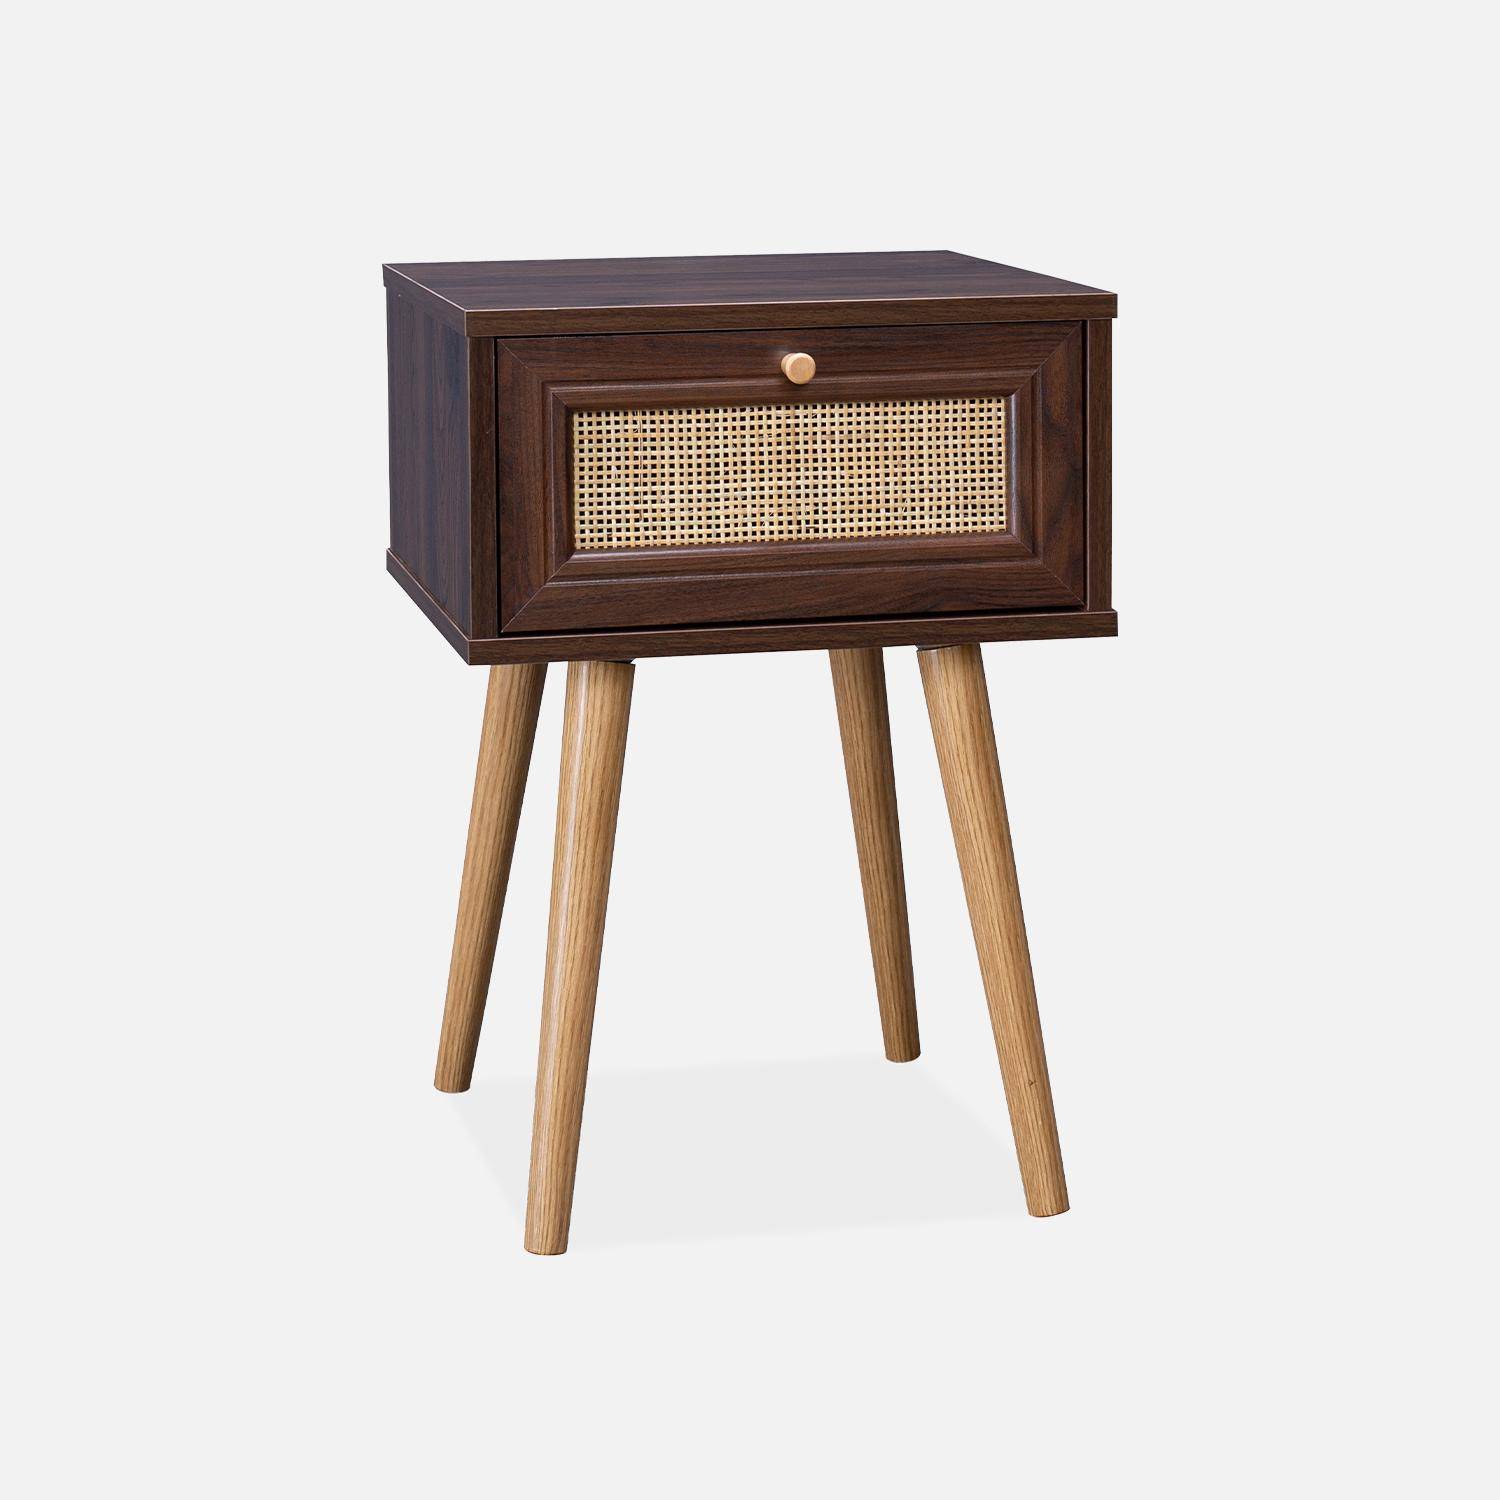 Wood and cane effect bedside table with 1 drawer - dark wood - Boheme Photo3